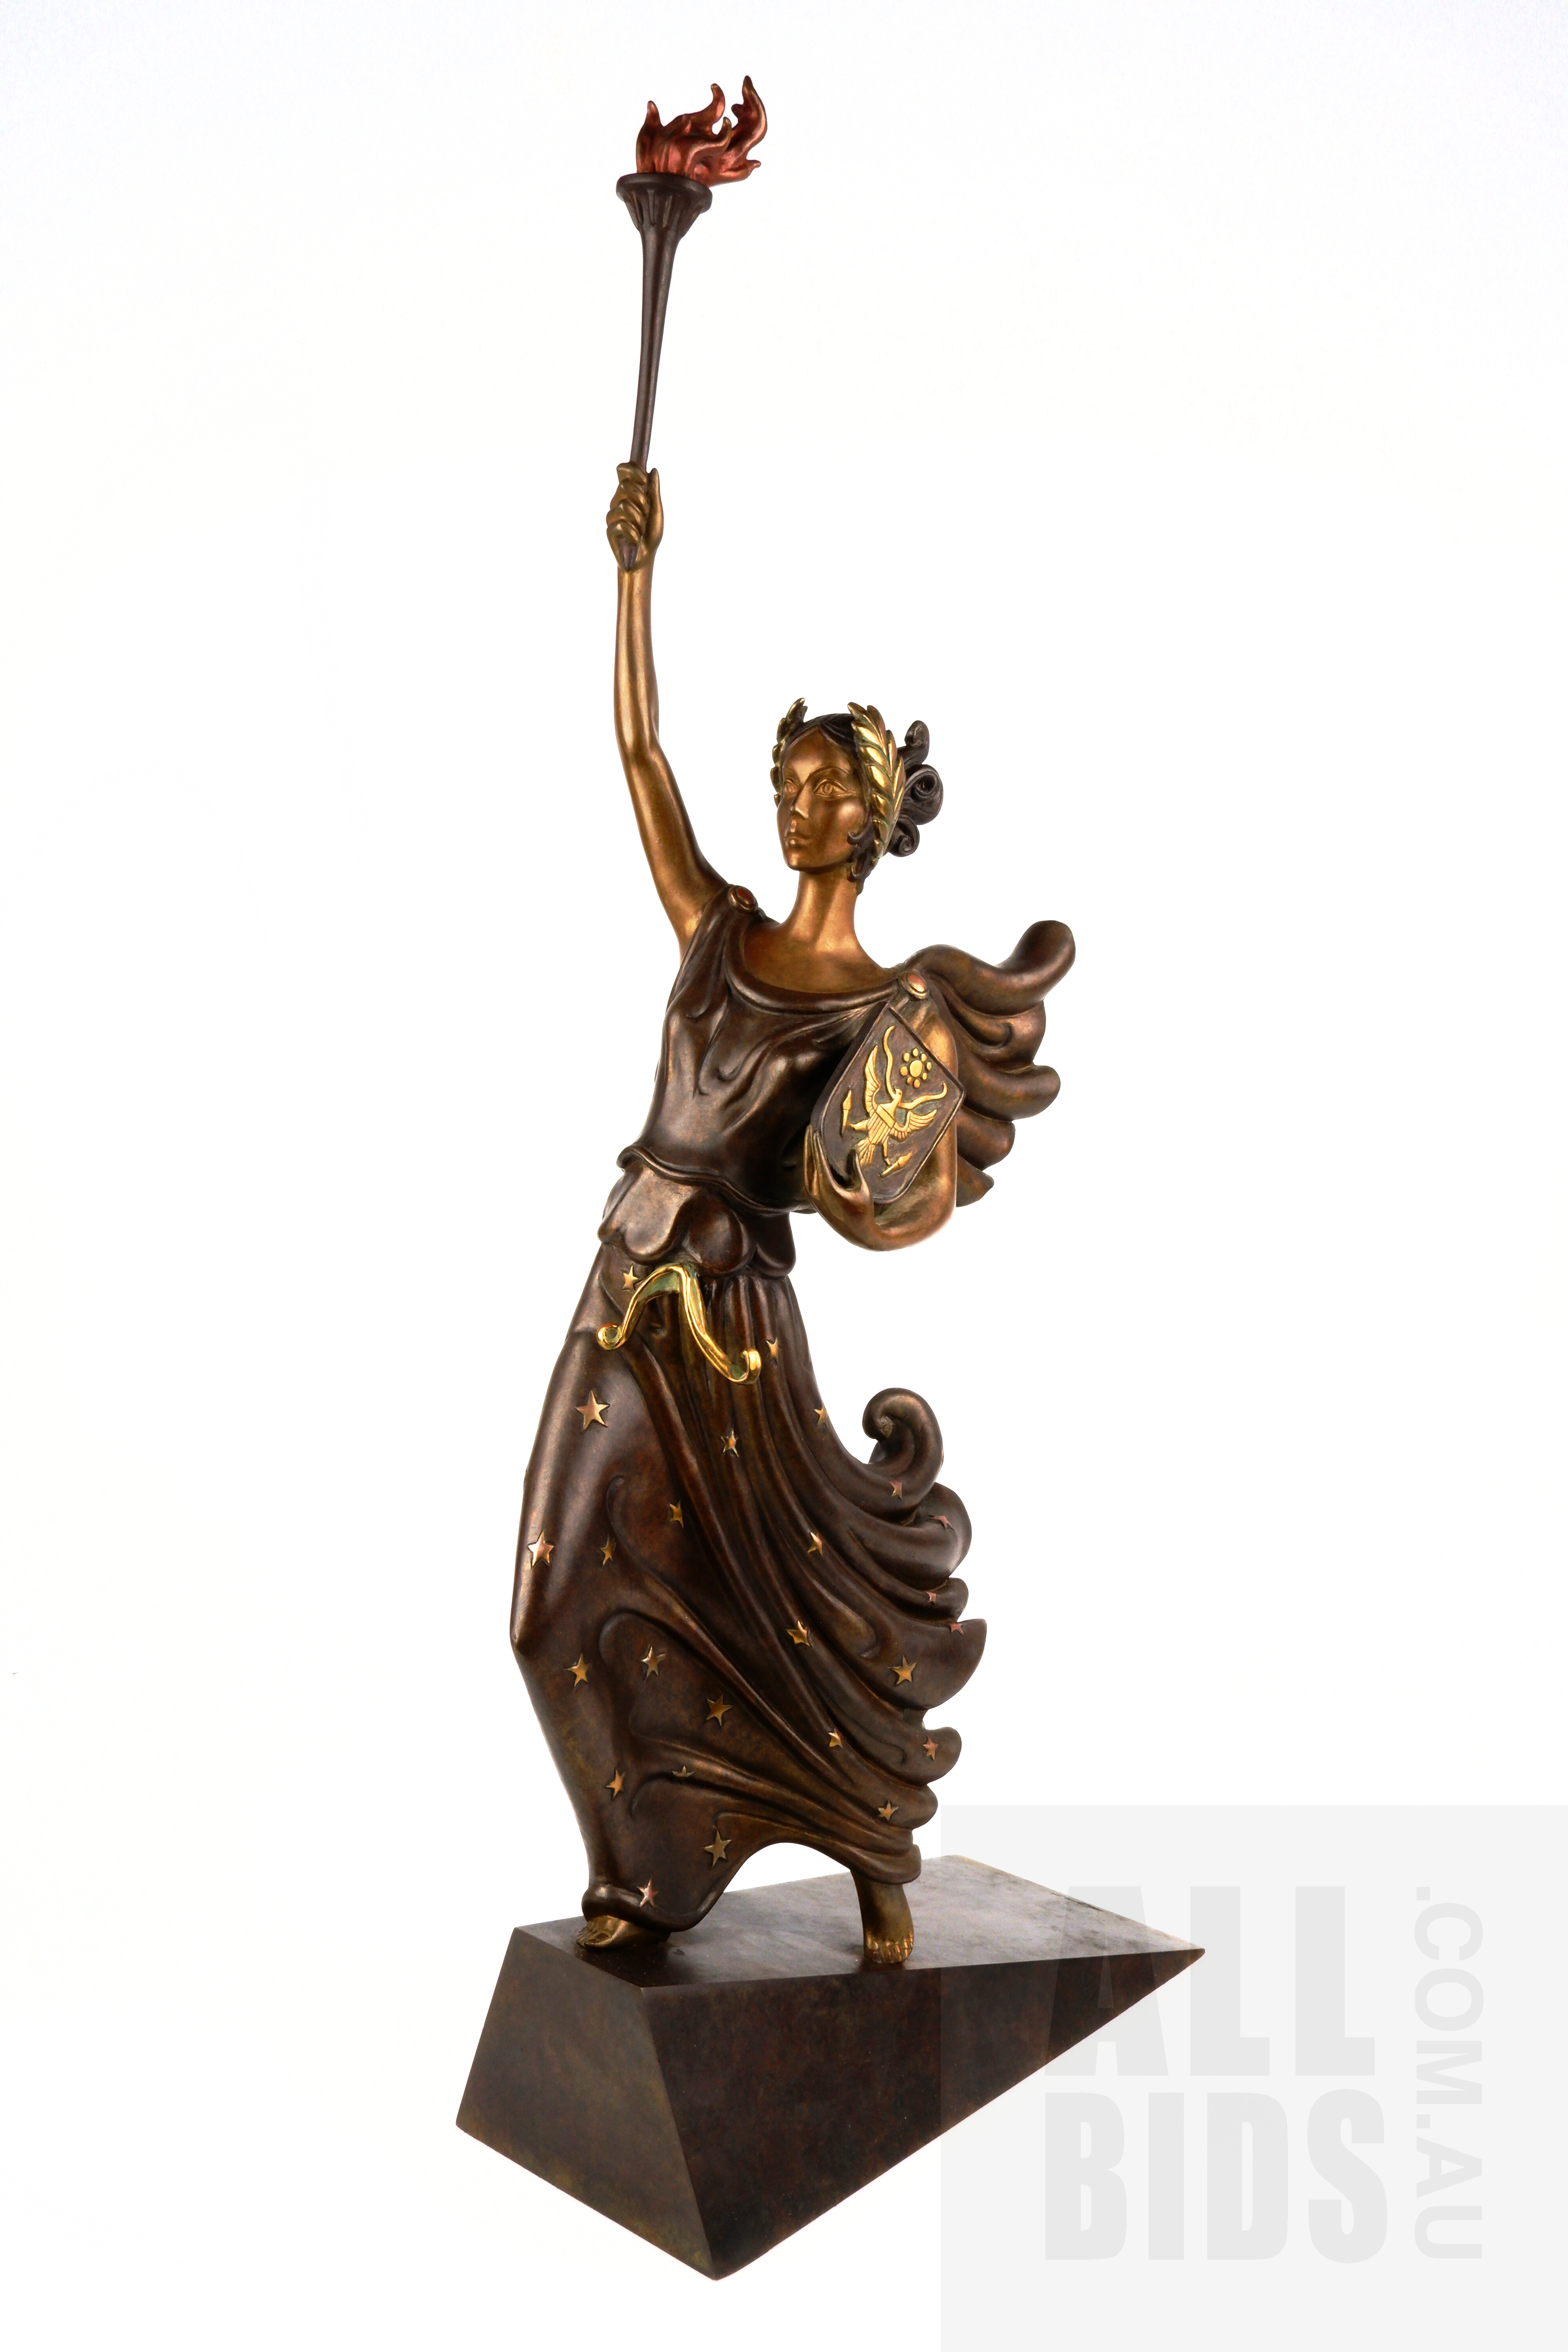 'Erte "Liberty, Fearless and Free" Bronze Sculpture, Published by Fine Art Acquisitions 1984, Edition 109/500'